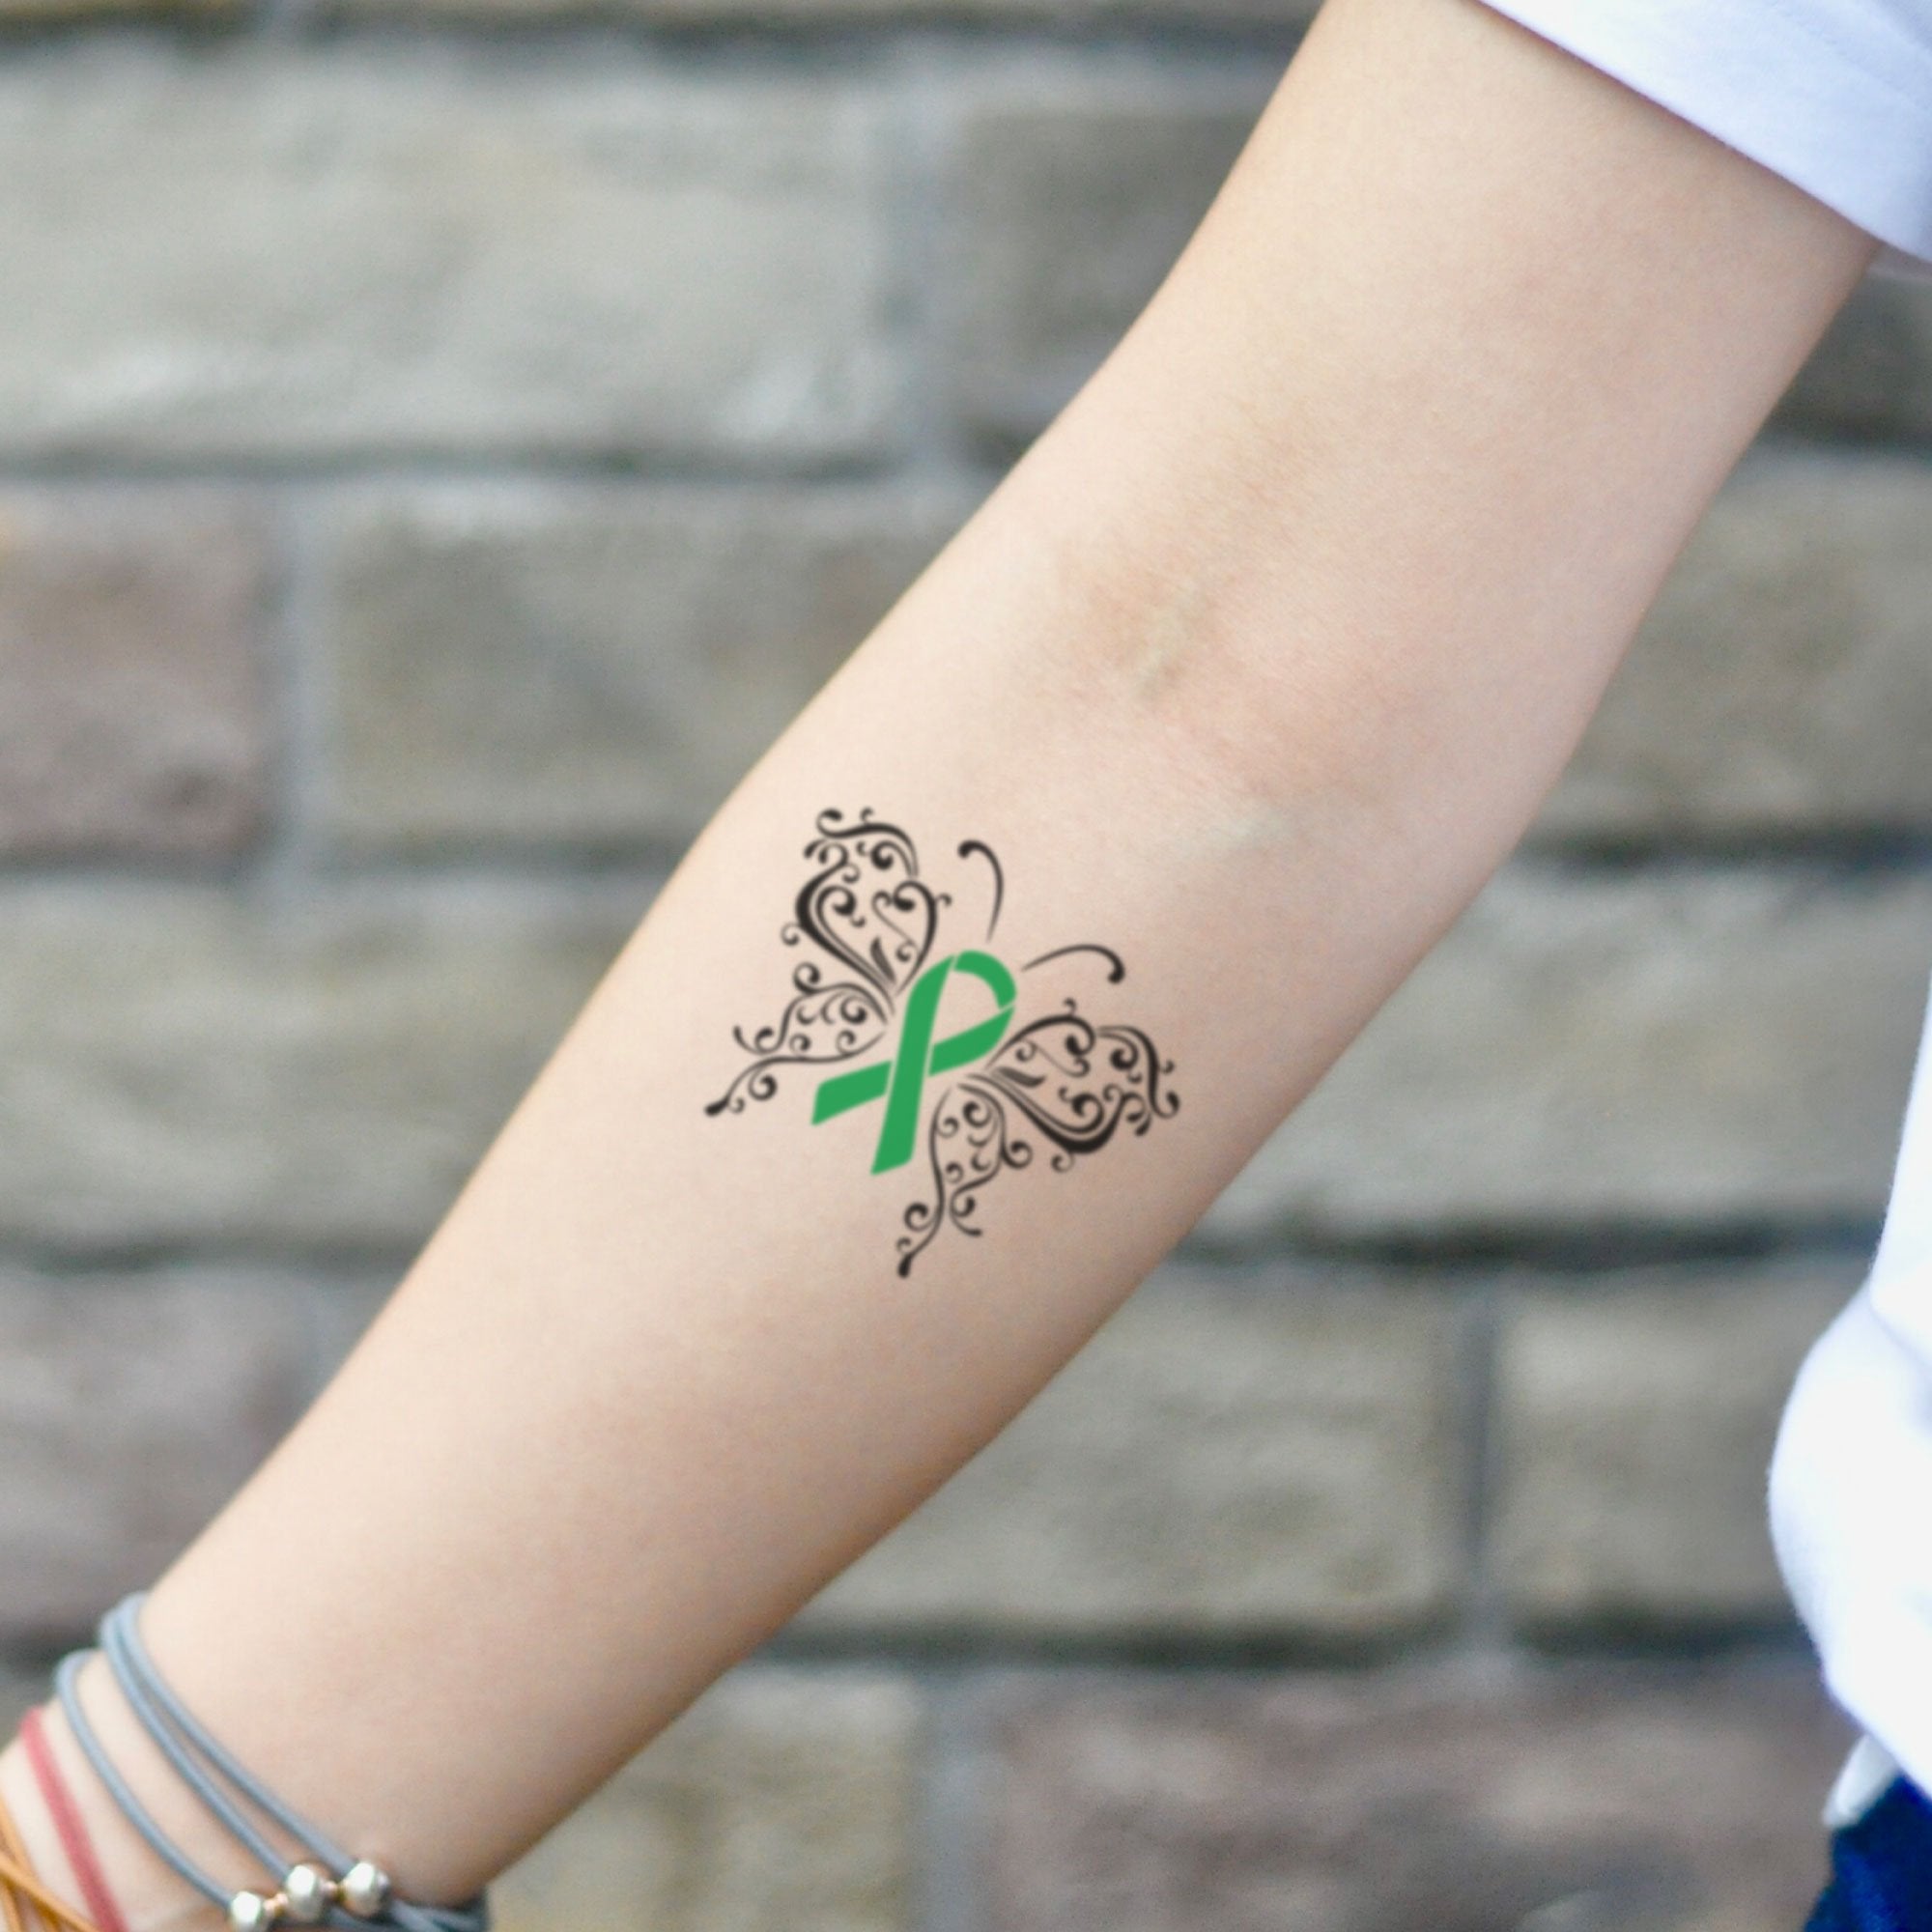 16 Small Tattoos That Represent A Cause That Matters MOst  YourTango